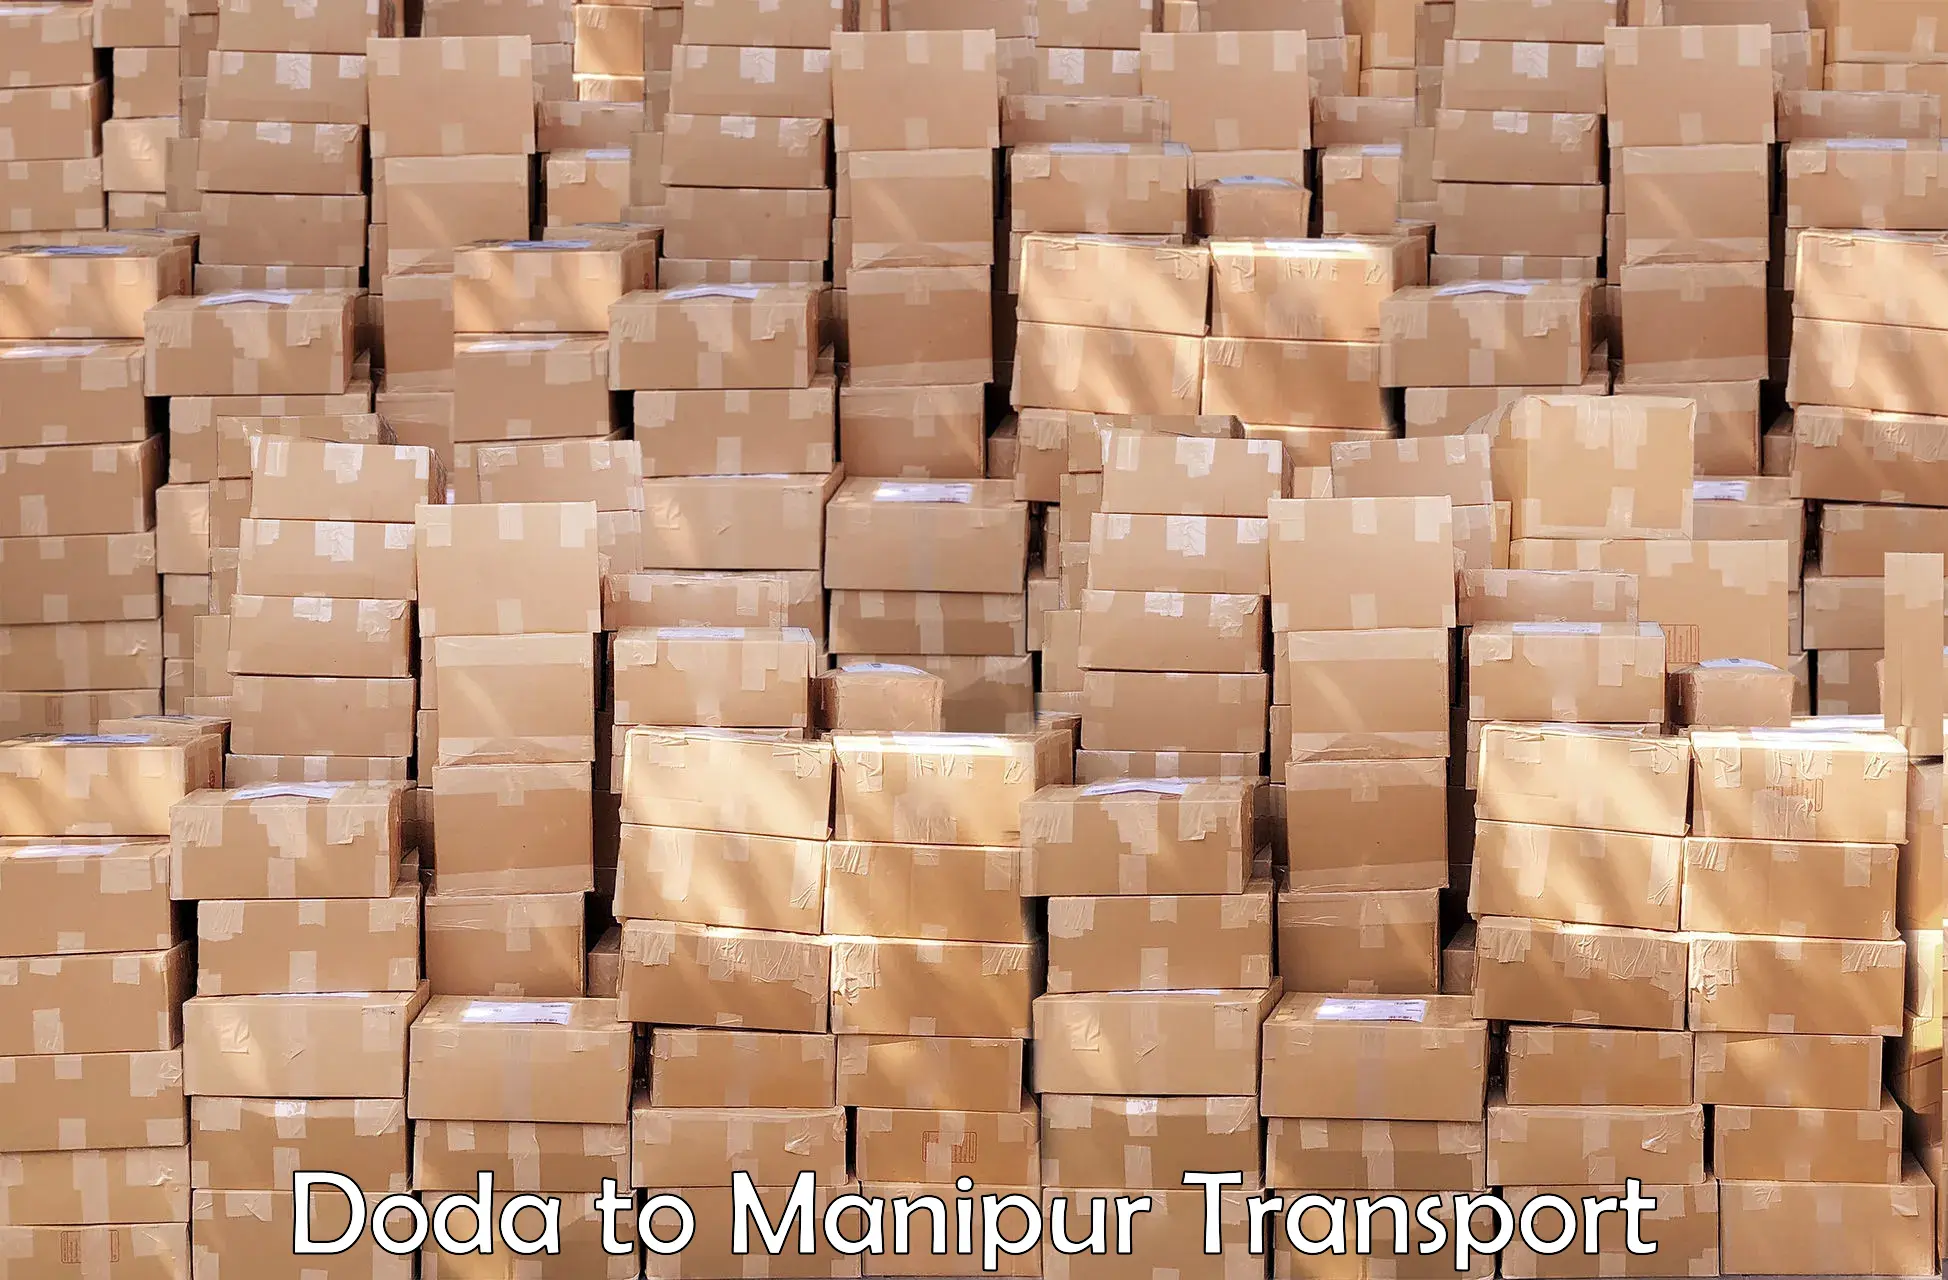 Delivery service Doda to Manipur